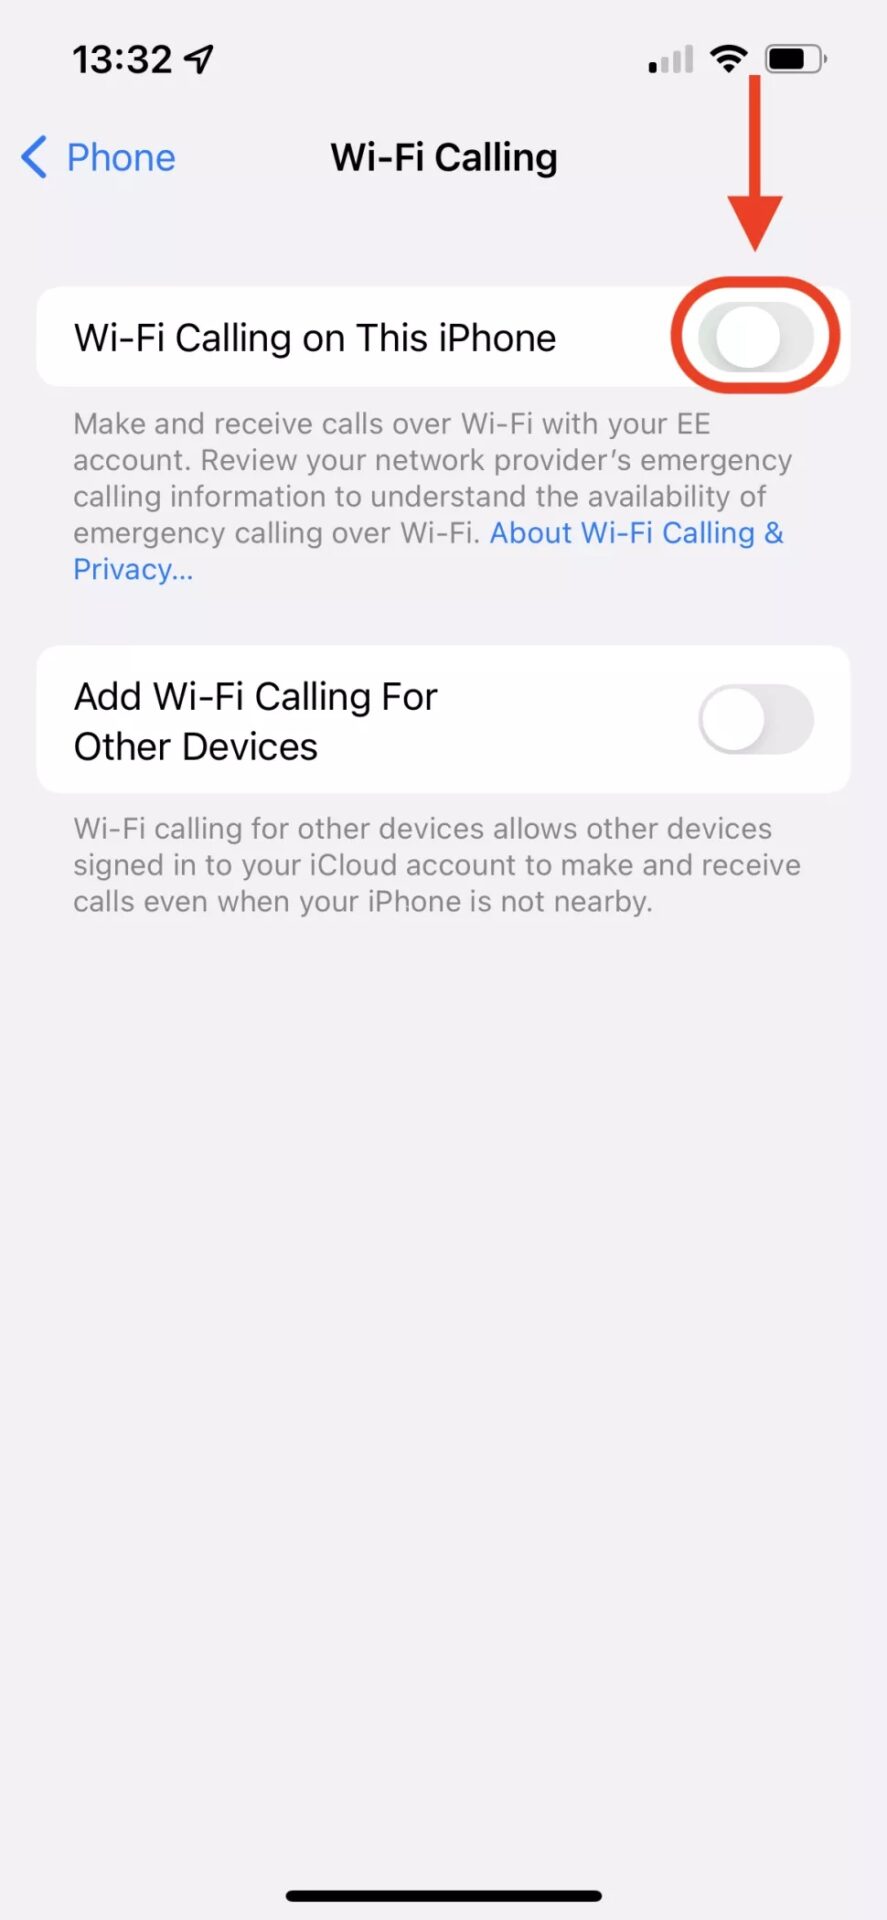 turning on Wi-Fi Calling Option for Other Devices